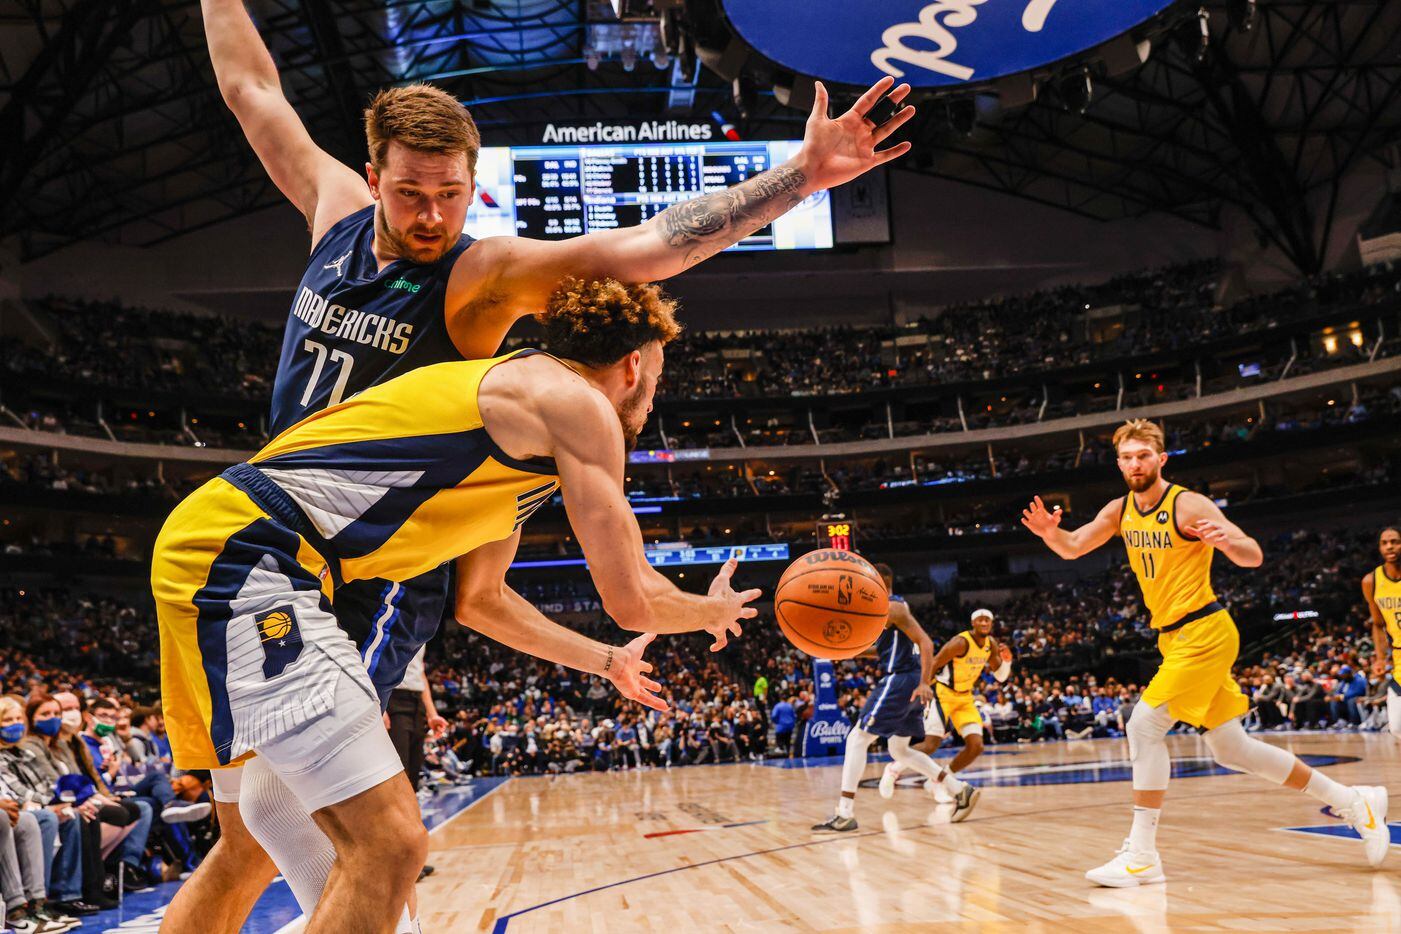 Indiana Pacers guard Chris Duarte (3) makes a pass to forward Domantas Sabonis (11) through Dallas Mavericks guard Luka Doncic (77) during a game at the American Airlines Center in Dallas on Saturday, January 29, 2022.